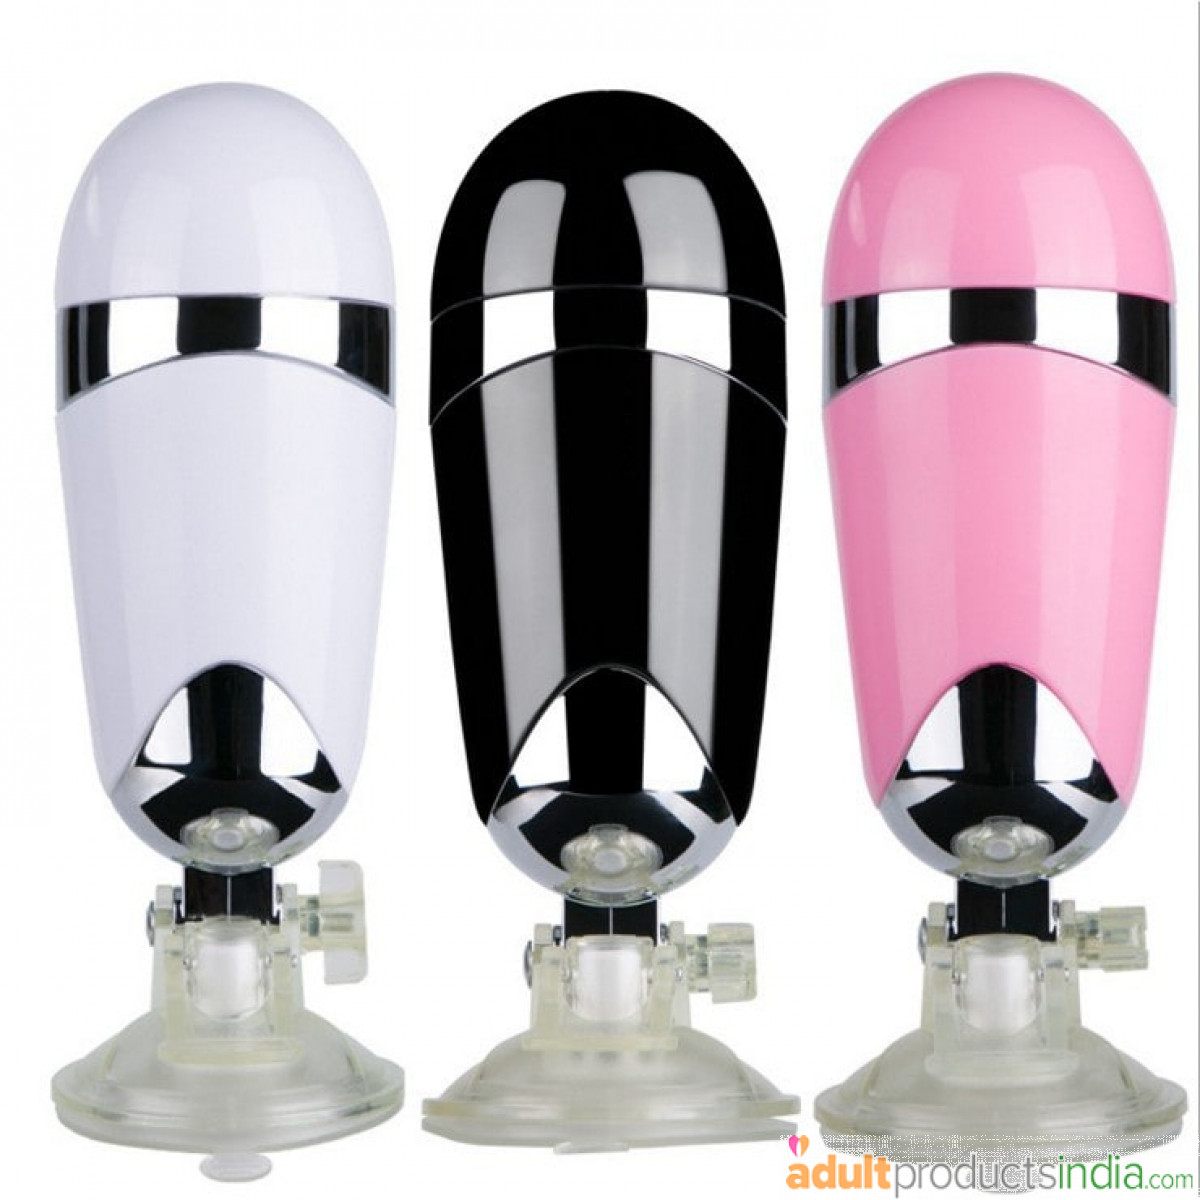 Hands-free automatic electric aircraft cup male masturbator for male